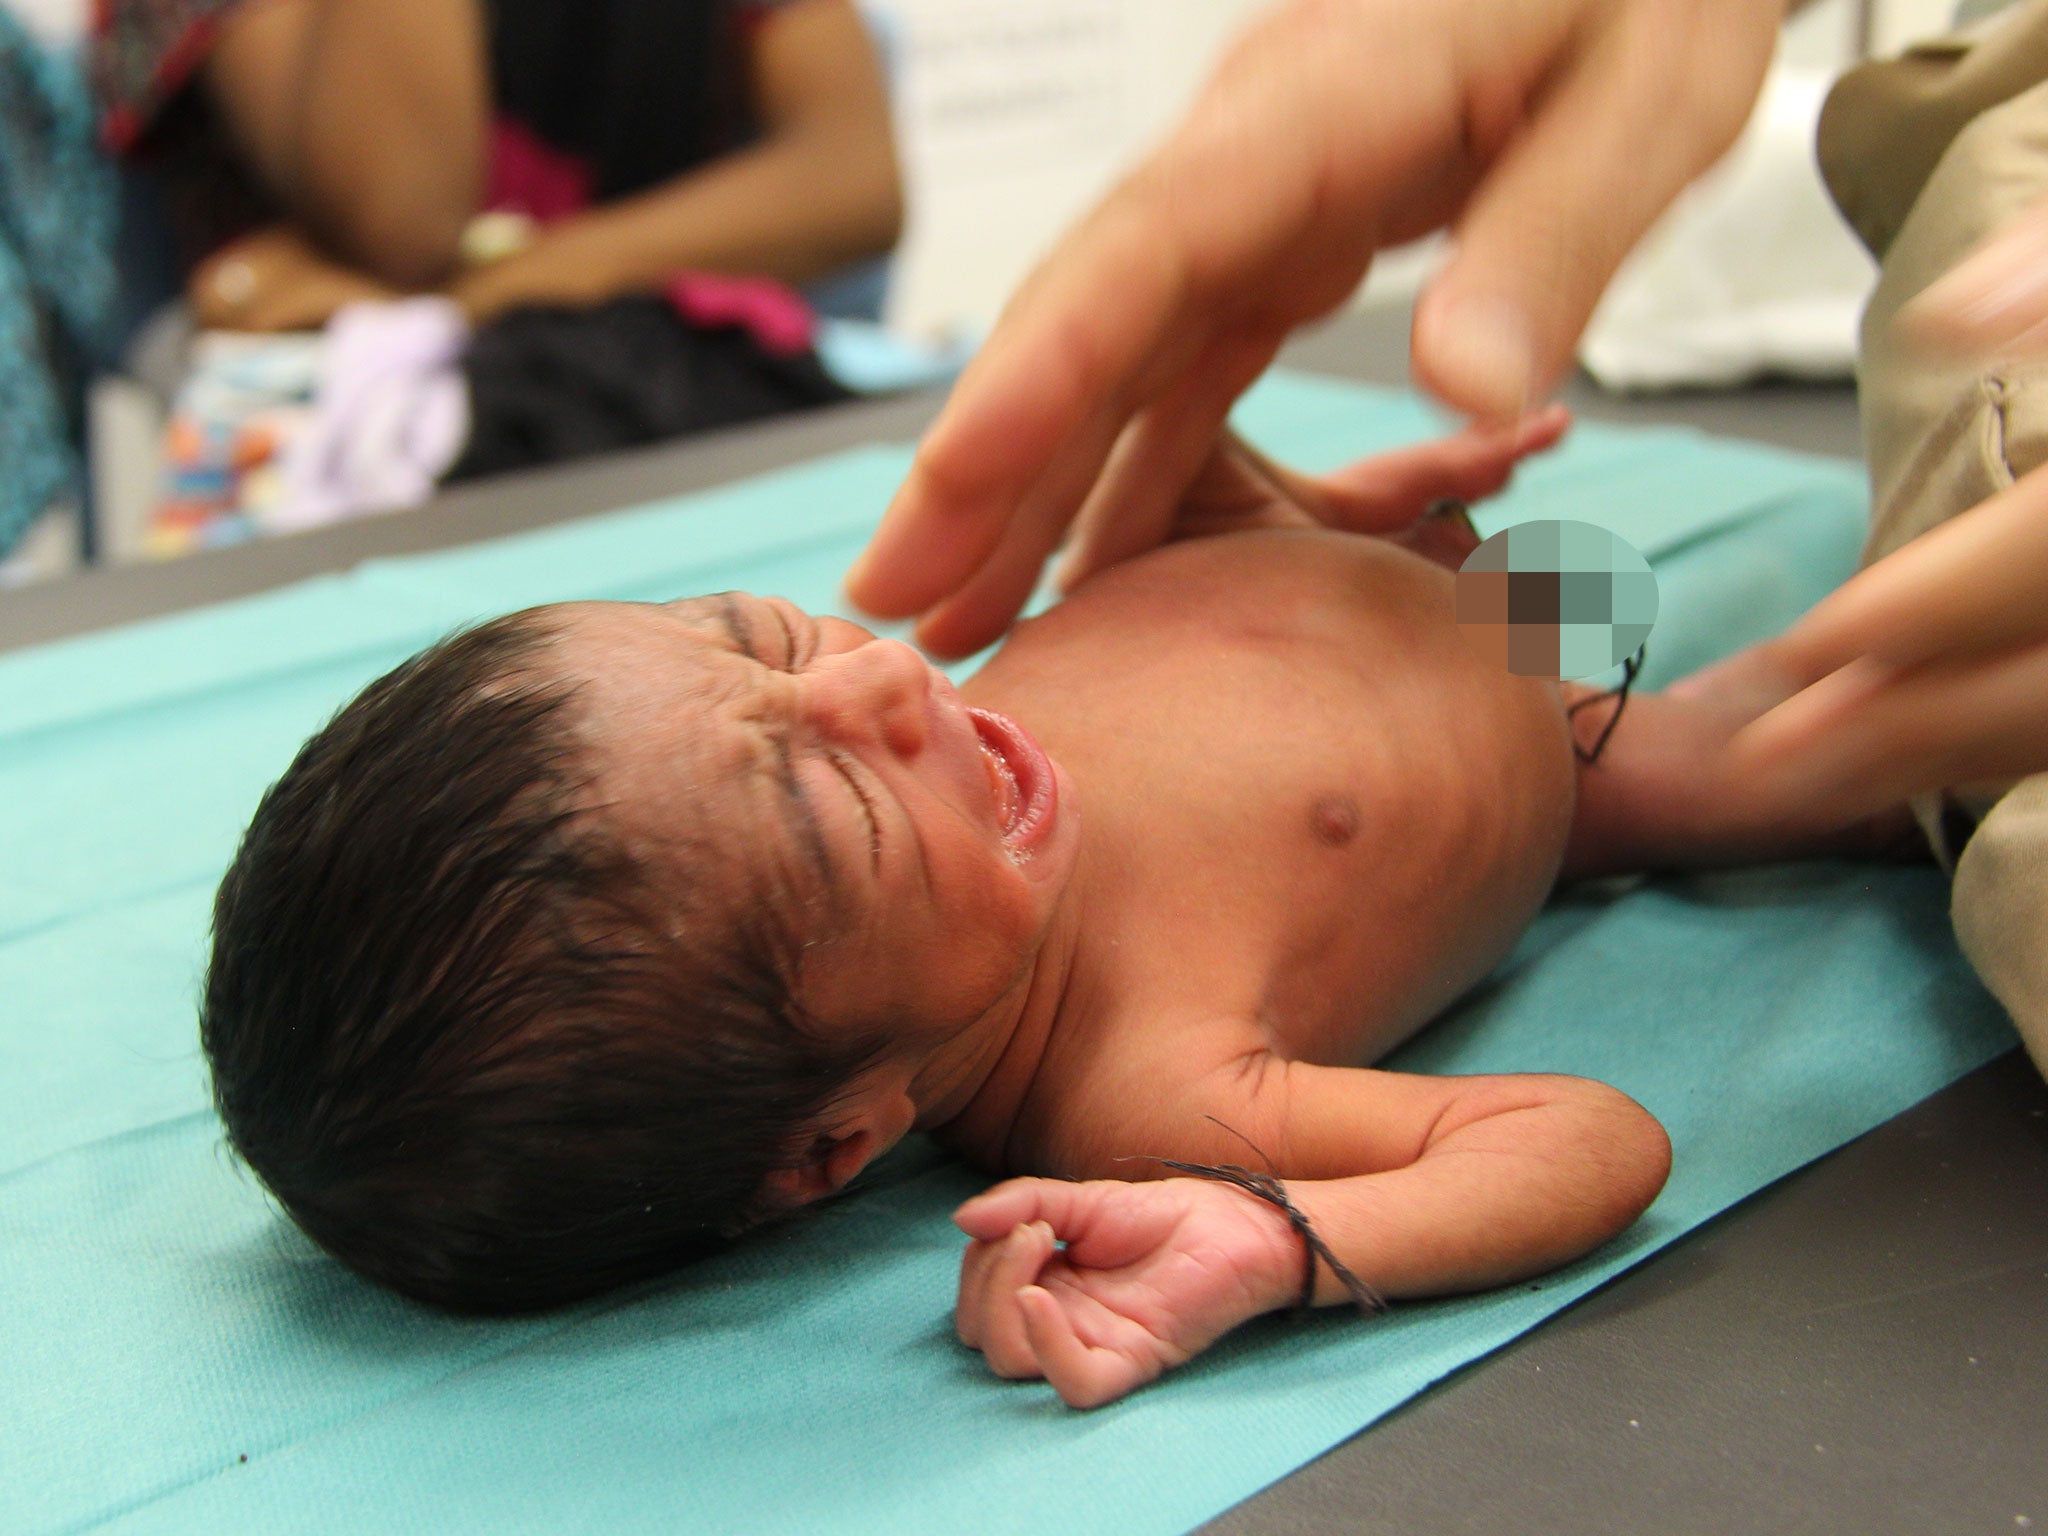 One of the five-day-old twins rescued by the MSF vessel the Dignity I off the coast of Libya on 29 August